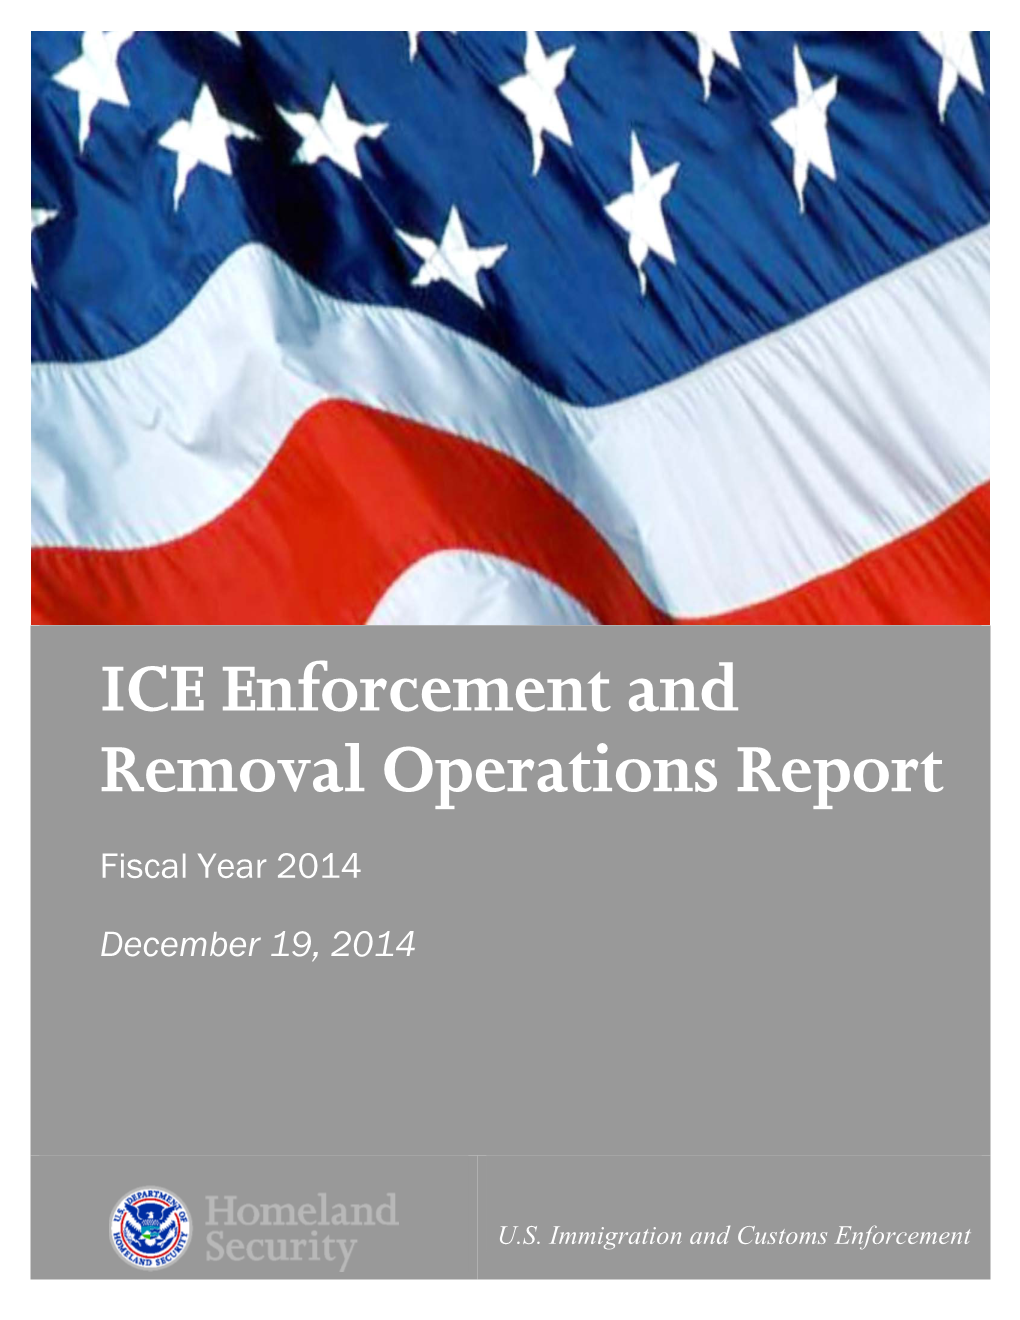 ICE Enforcement and Removal Operations Report